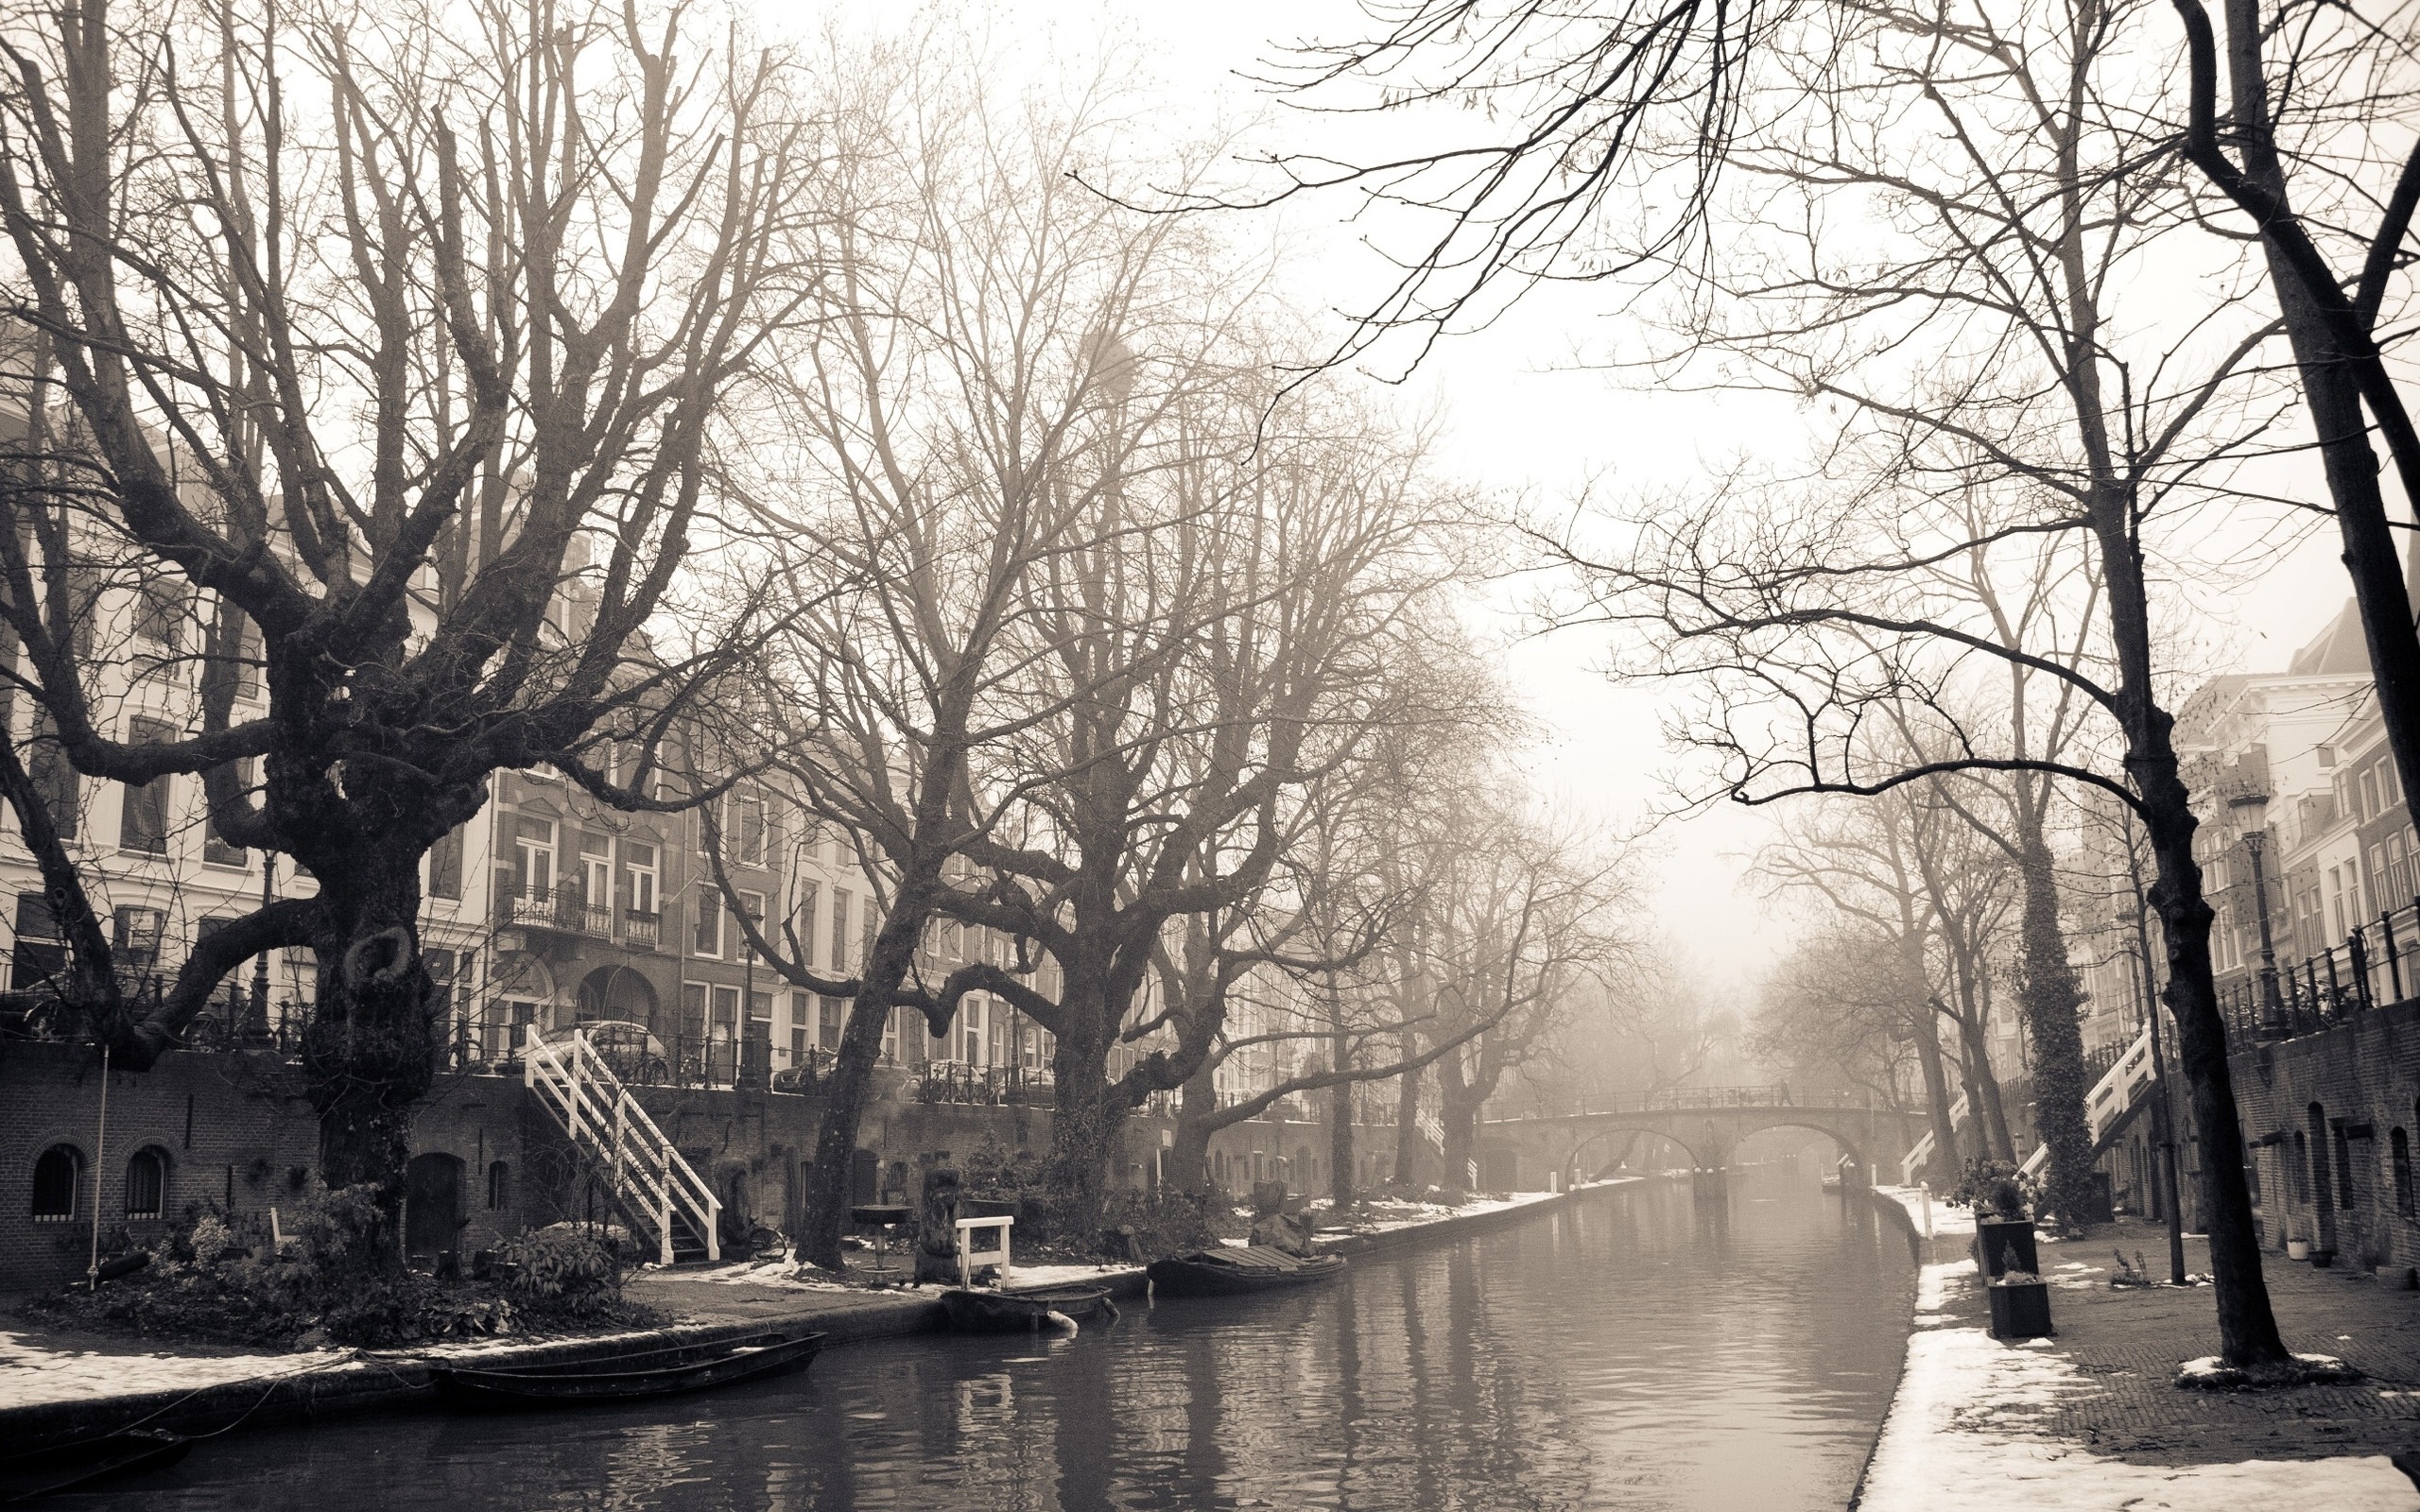 Man Made Canal HD Wallpaper | Background Image